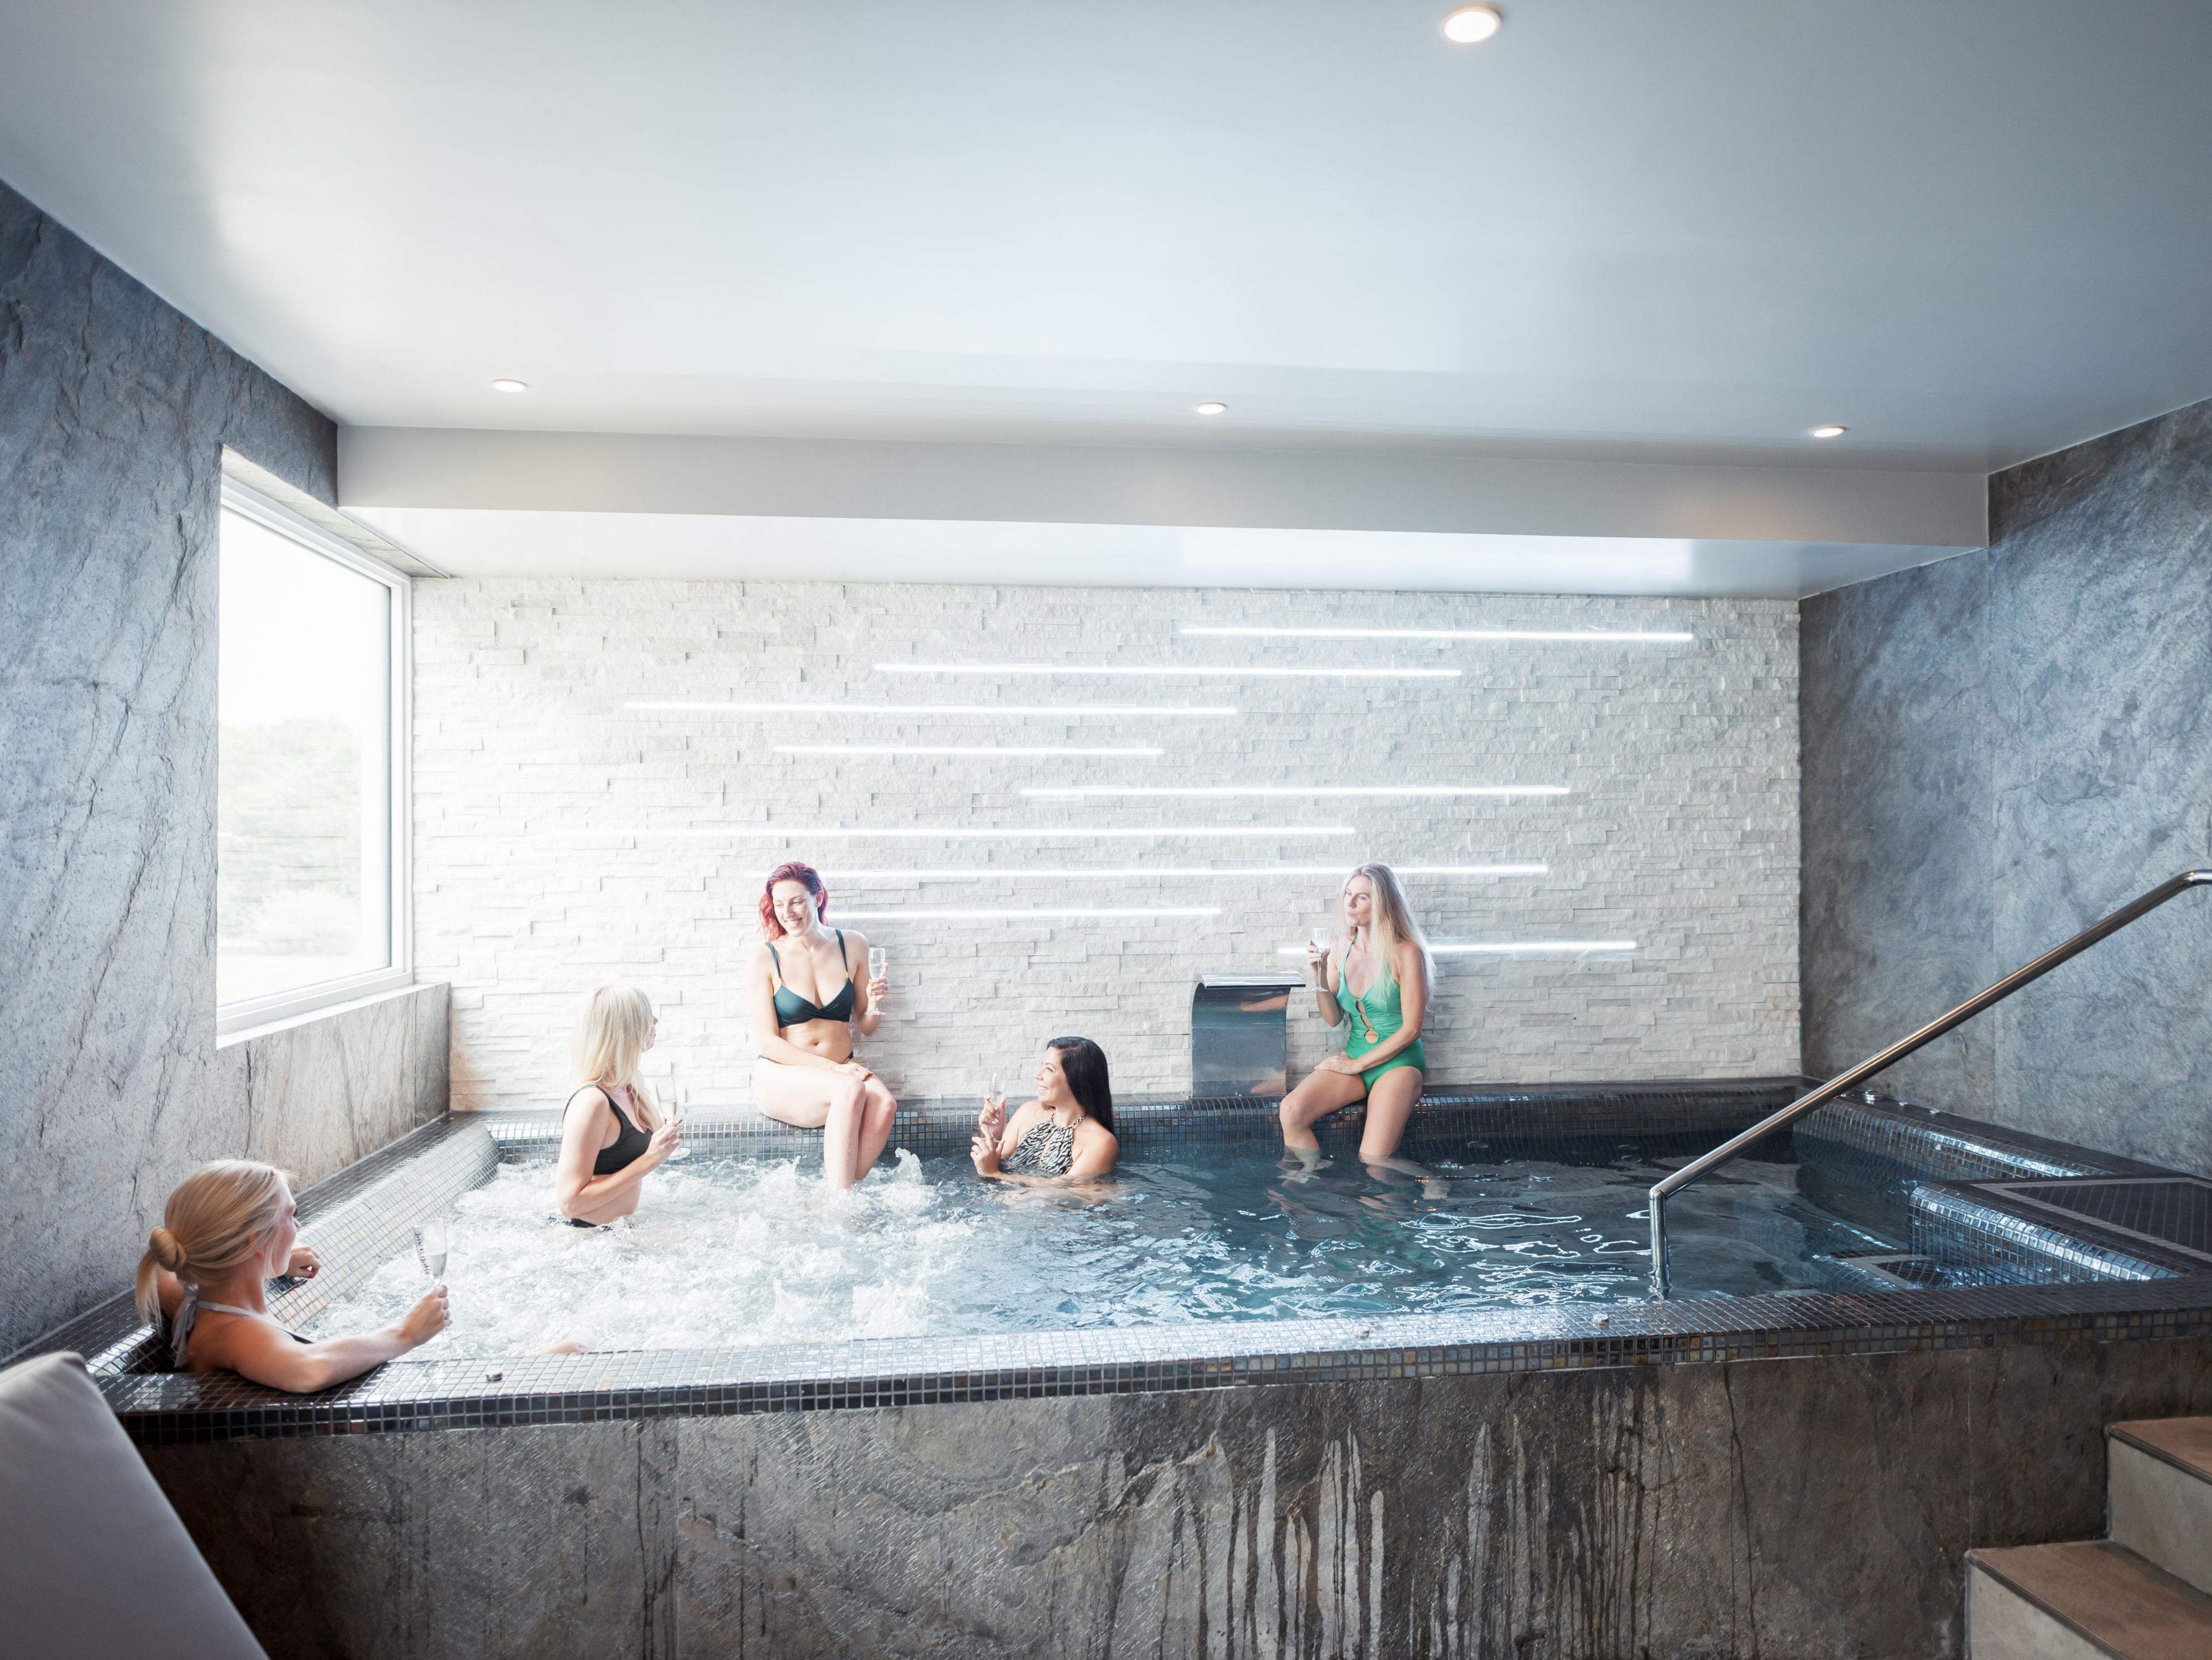 Open July 2019, the ANA Spa offers the ultimate in luxury.  Indulge in an Elemis facial or massage in one of our five treatments rooms, work out in the gym and studio or just relax in the hydrotherapy pool, sauna and steam room.   Enjoy afternoon tea or lunch in the Spa Lounge and for those looking for fun enjoy time in our Mud Rasul Suite.   